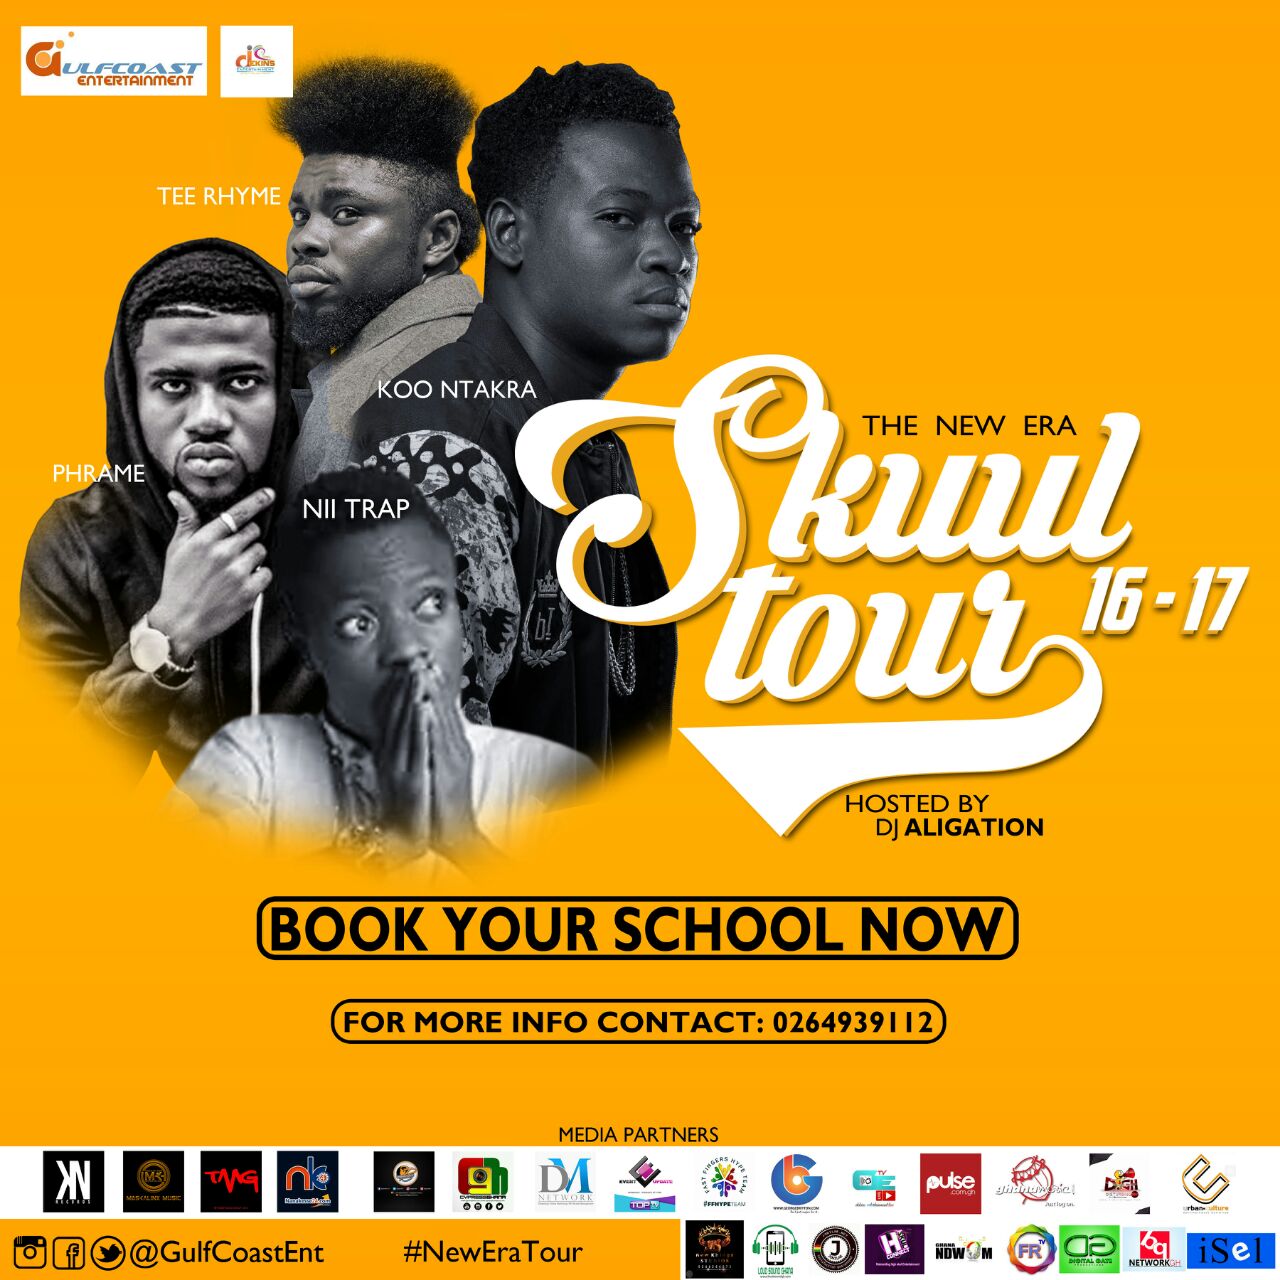 Koo Ntakra to Kickstart Schools Tour with Friends this October 15th.